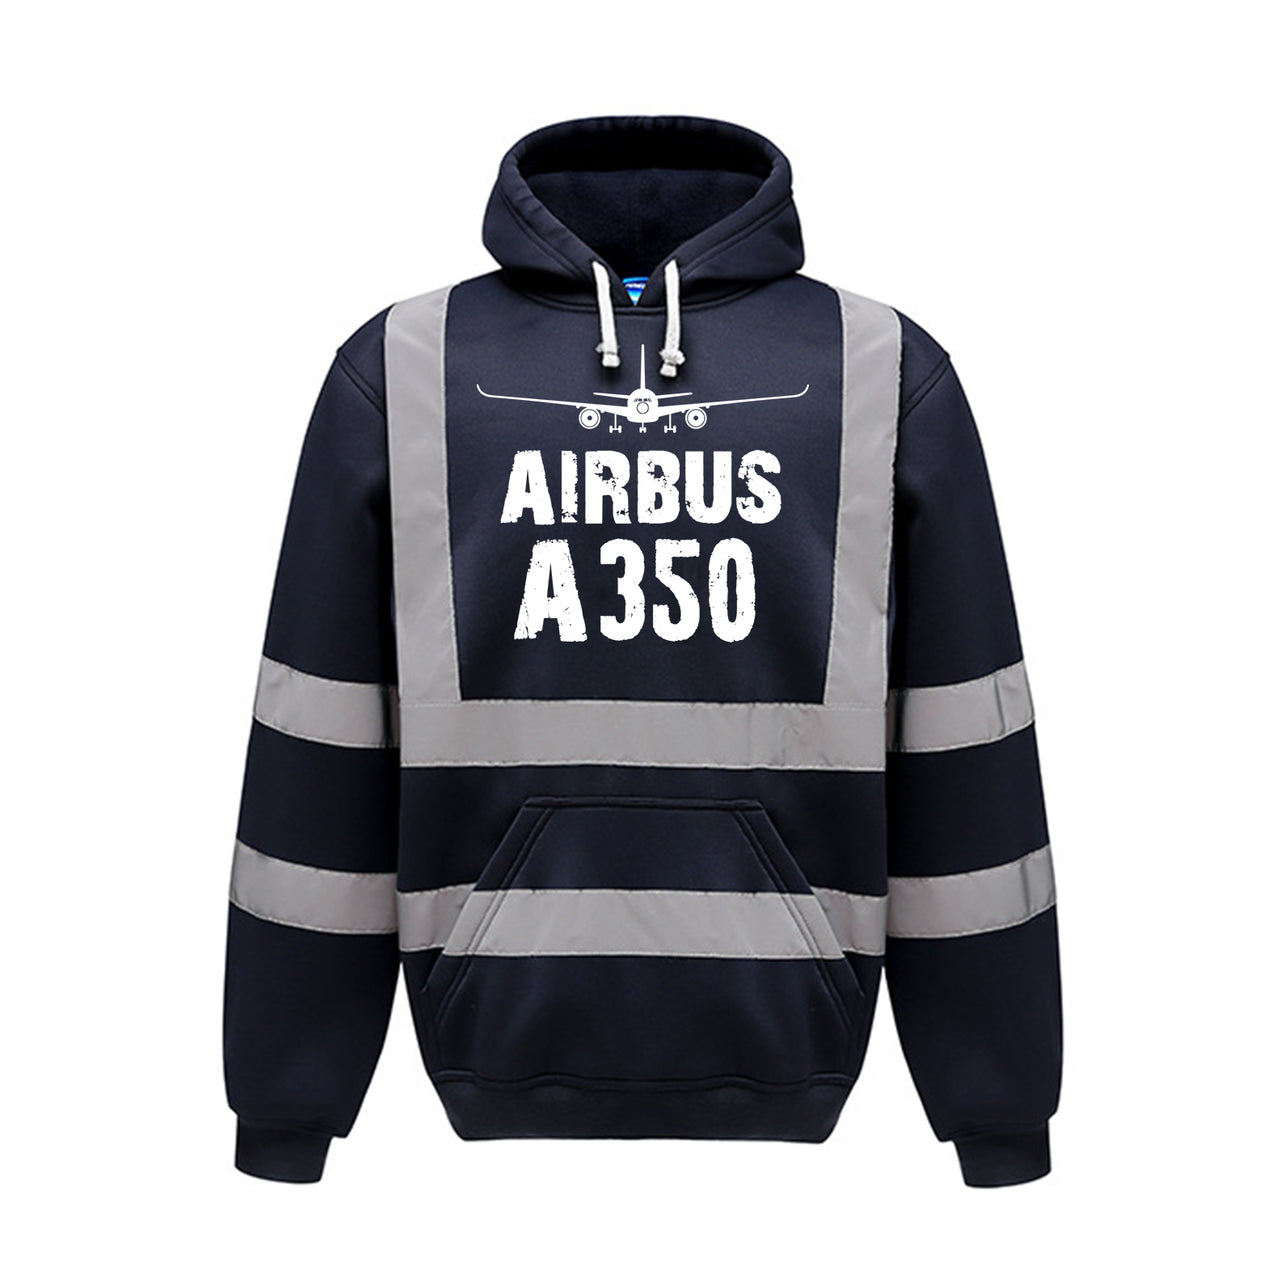 Airbus A350 & Plane Designed Reflective Hoodies